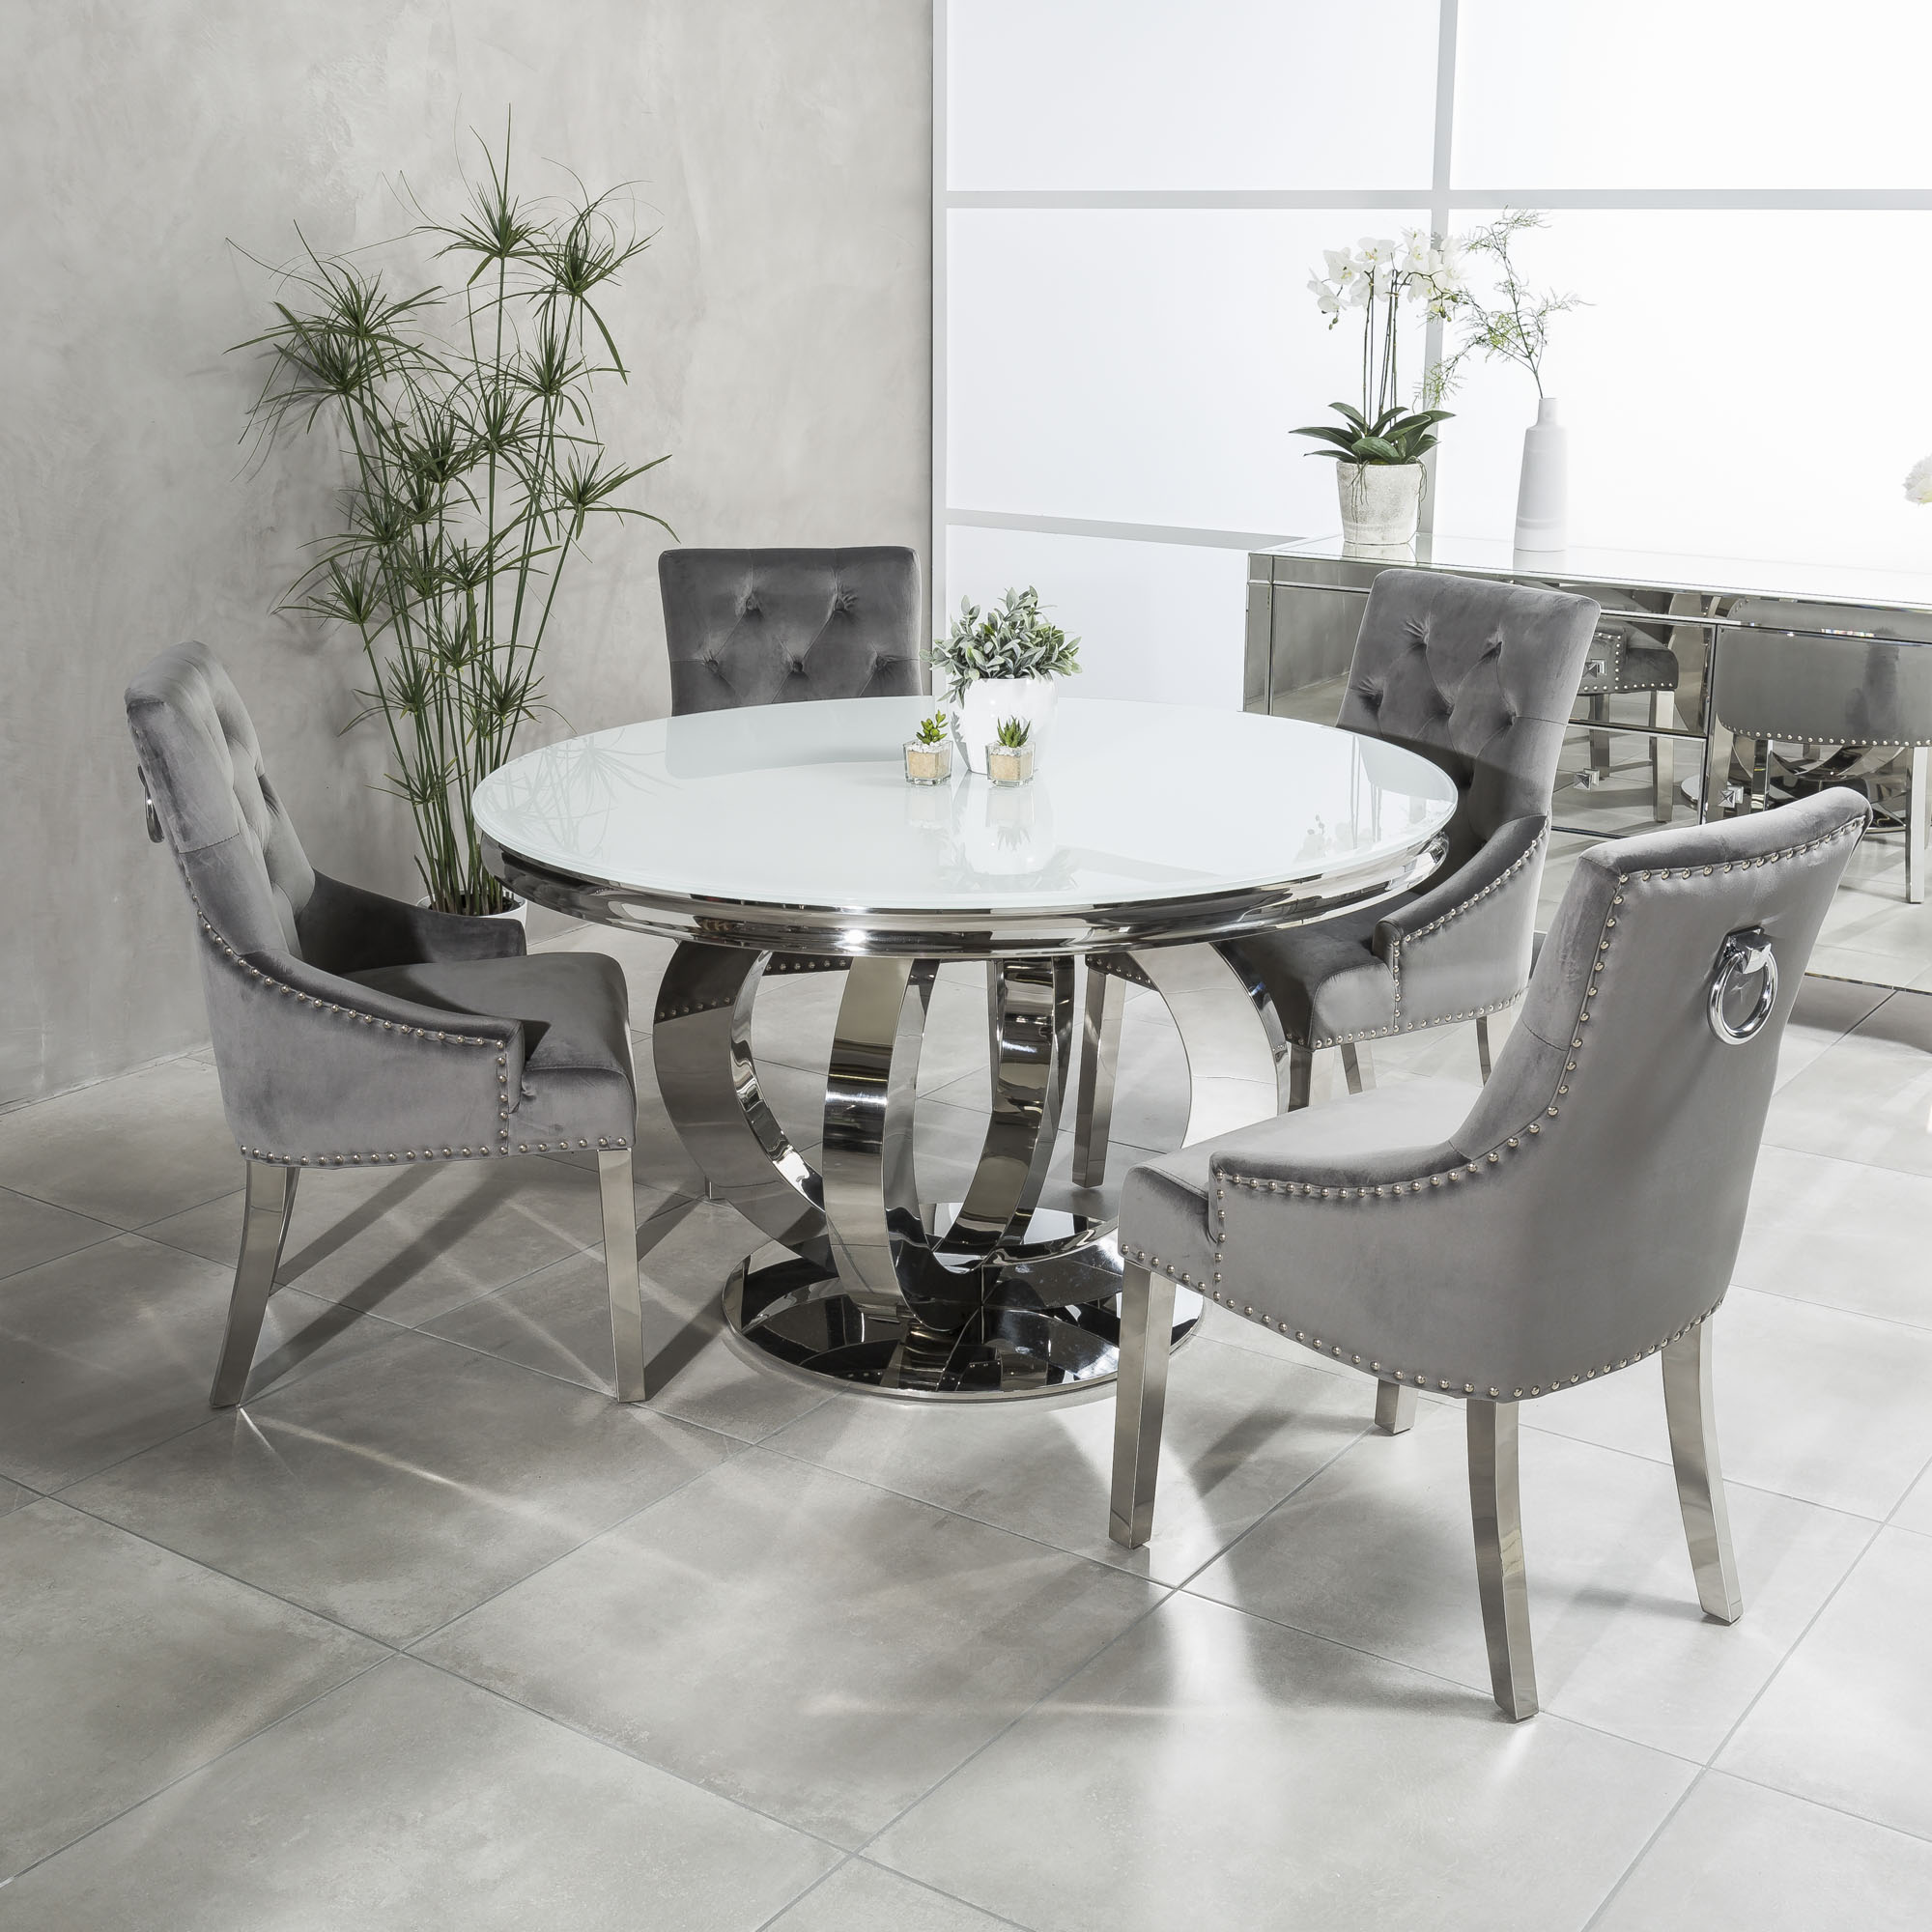 1.3m Circular Polished Steel Dining White Glass Table Set with 4 Grey Brushed Velvet Dining Chairs